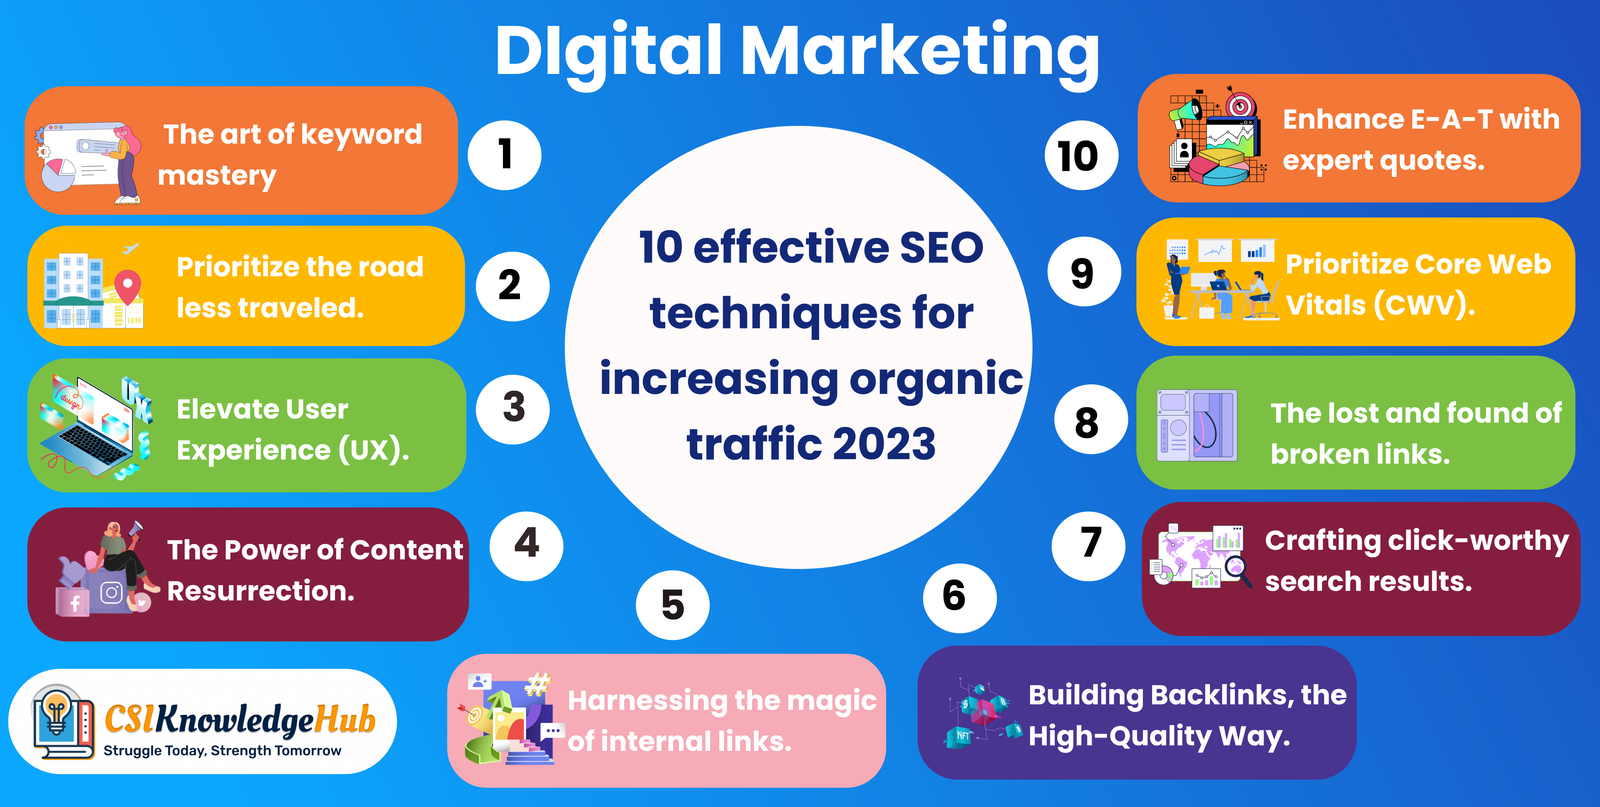 10 Effective SEO Techniques for Increasing Organic Traffic